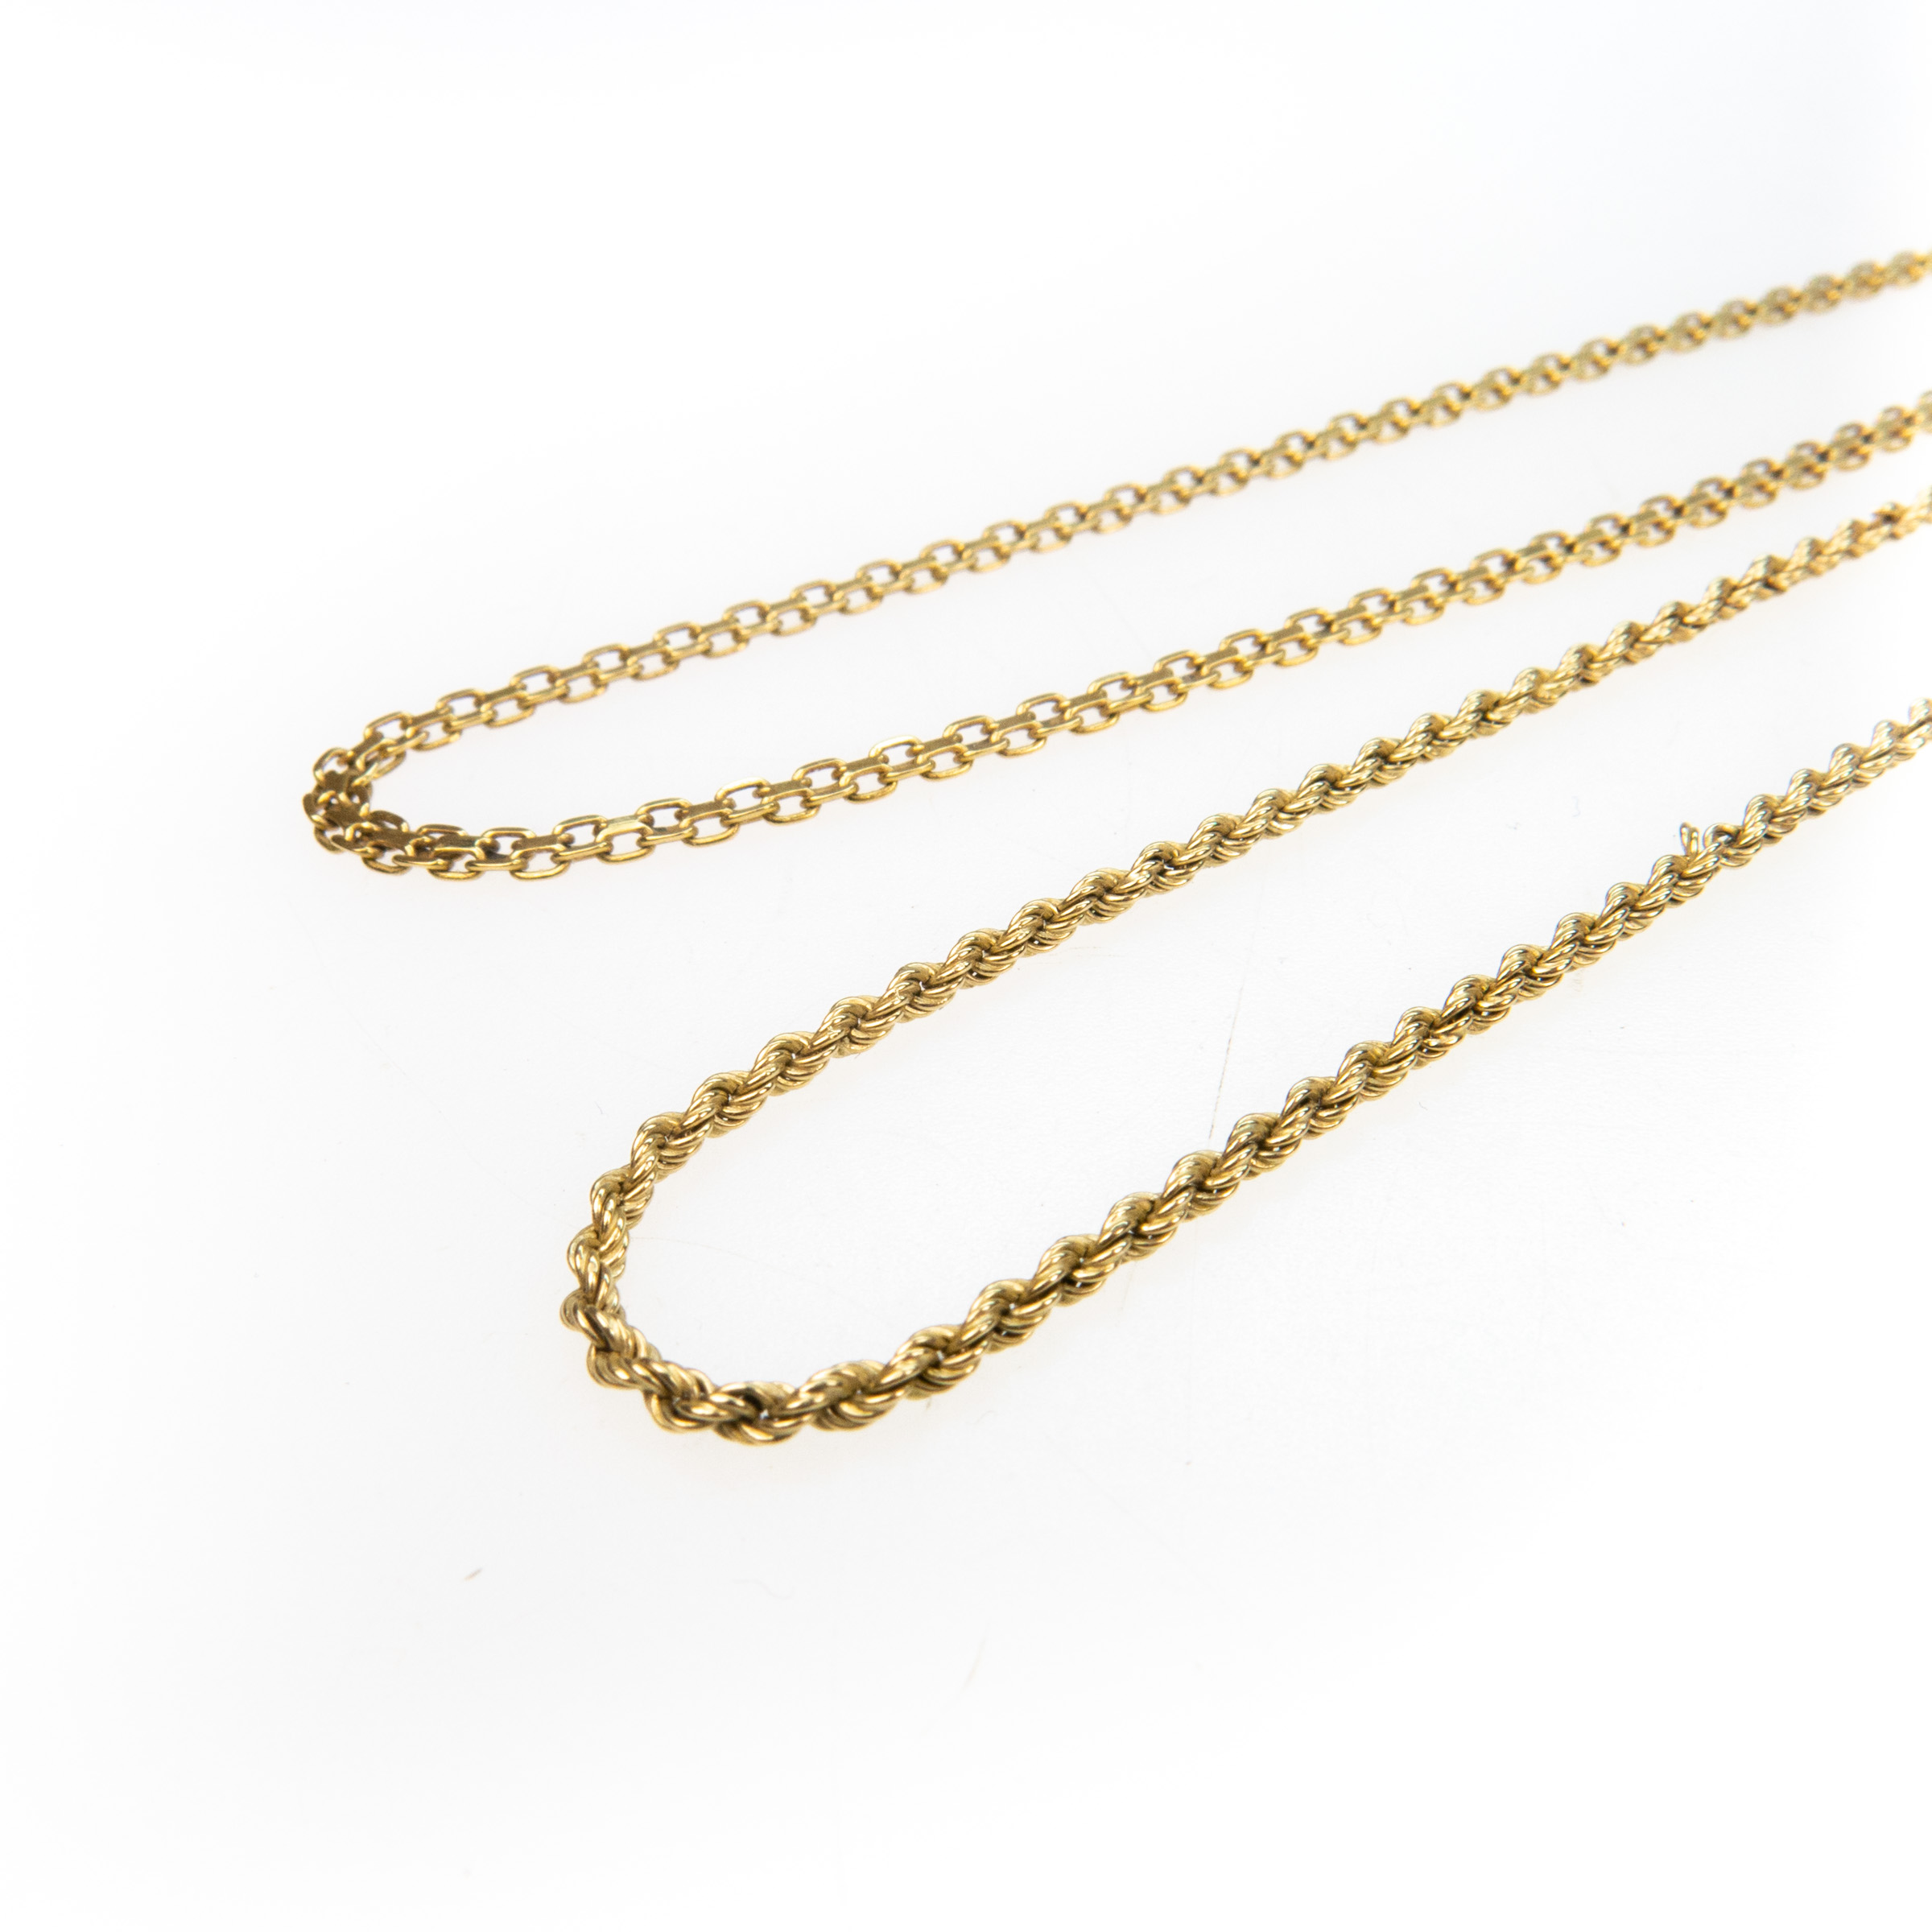 2 X 14K Yellow Gold Chains